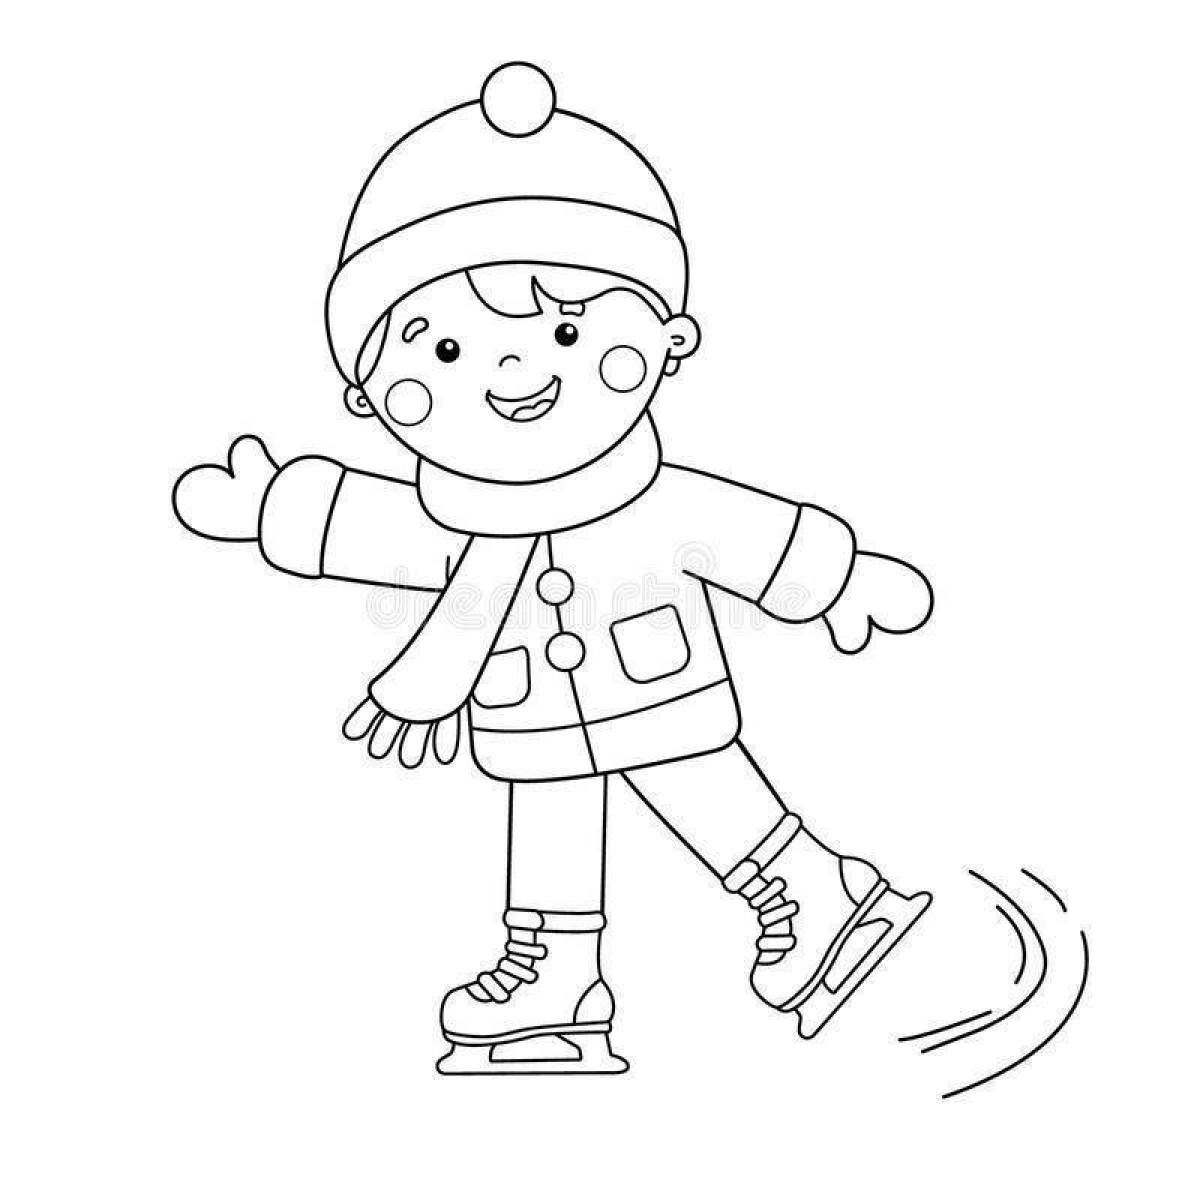 Great picture for winter sports for kids in kindergarten